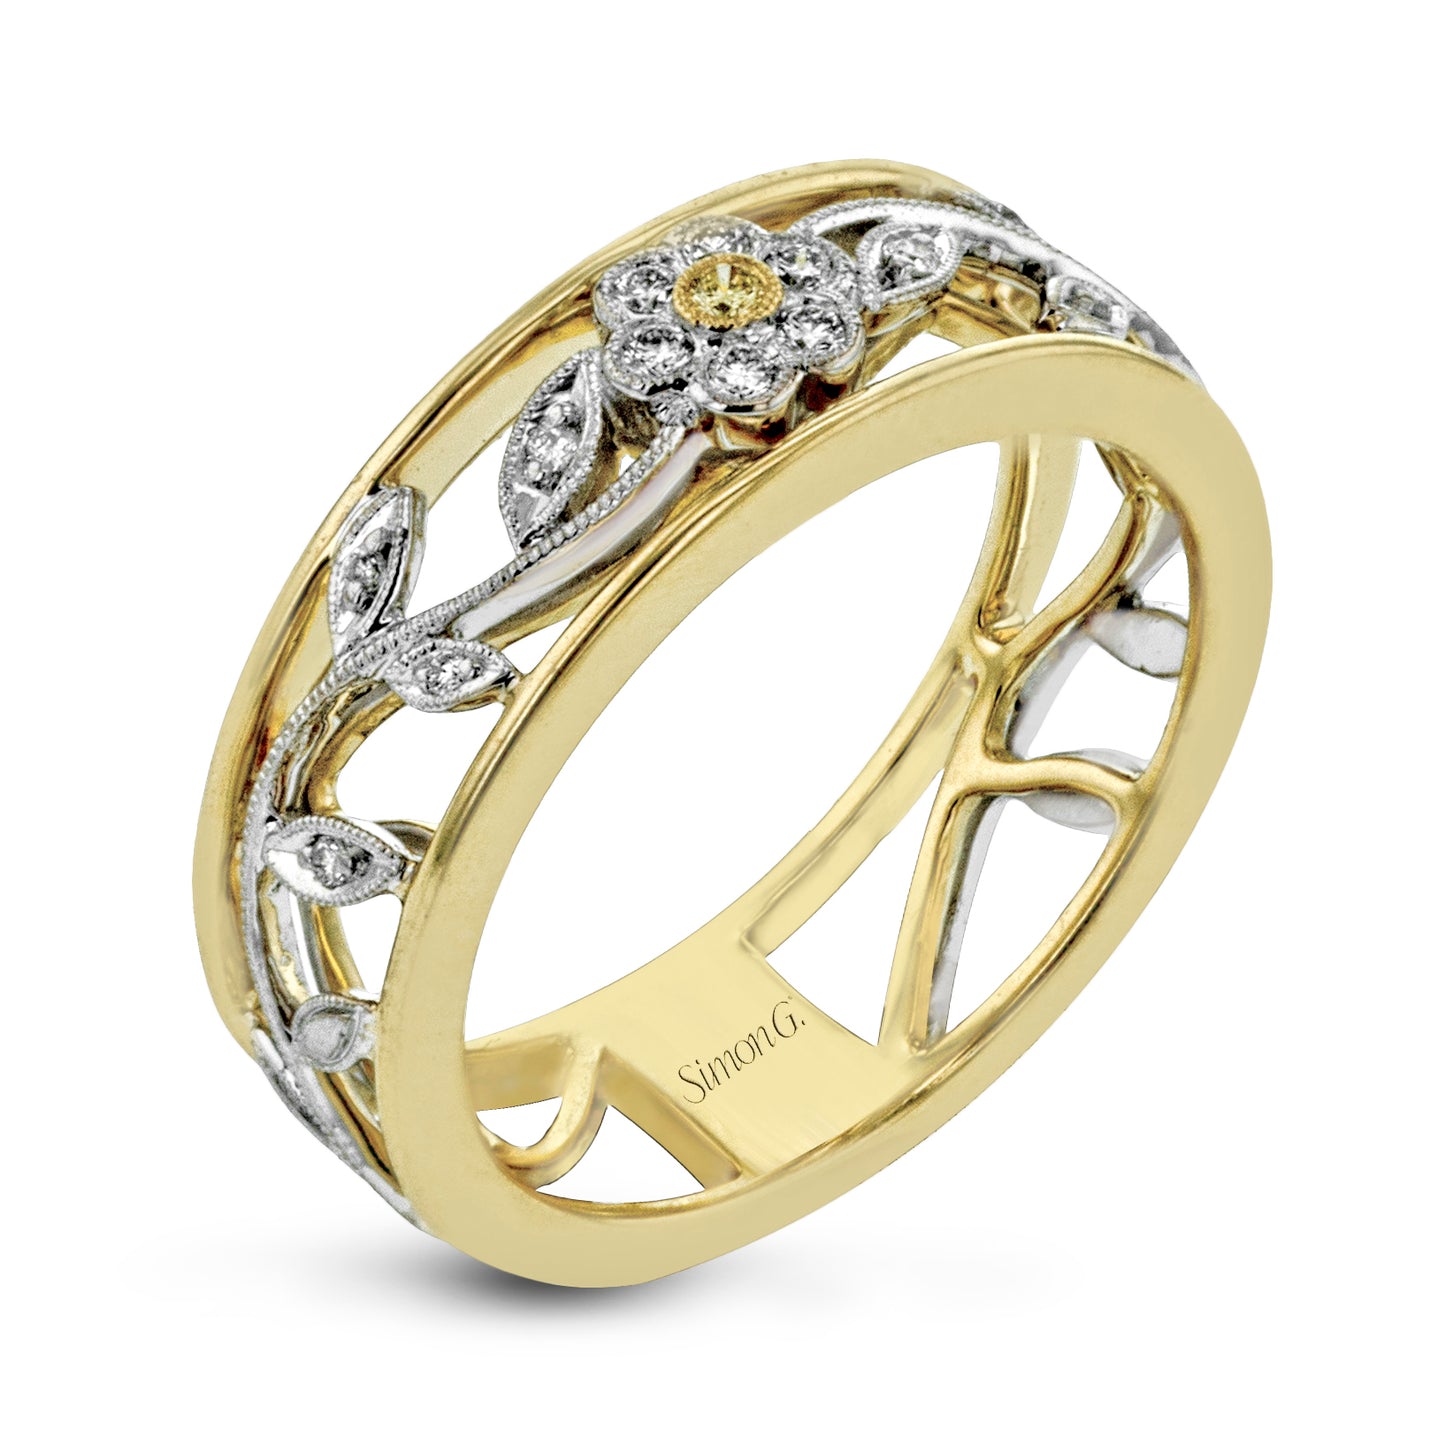 Trellis Fashion Ring in 18k Gold with .10ct Diamonds